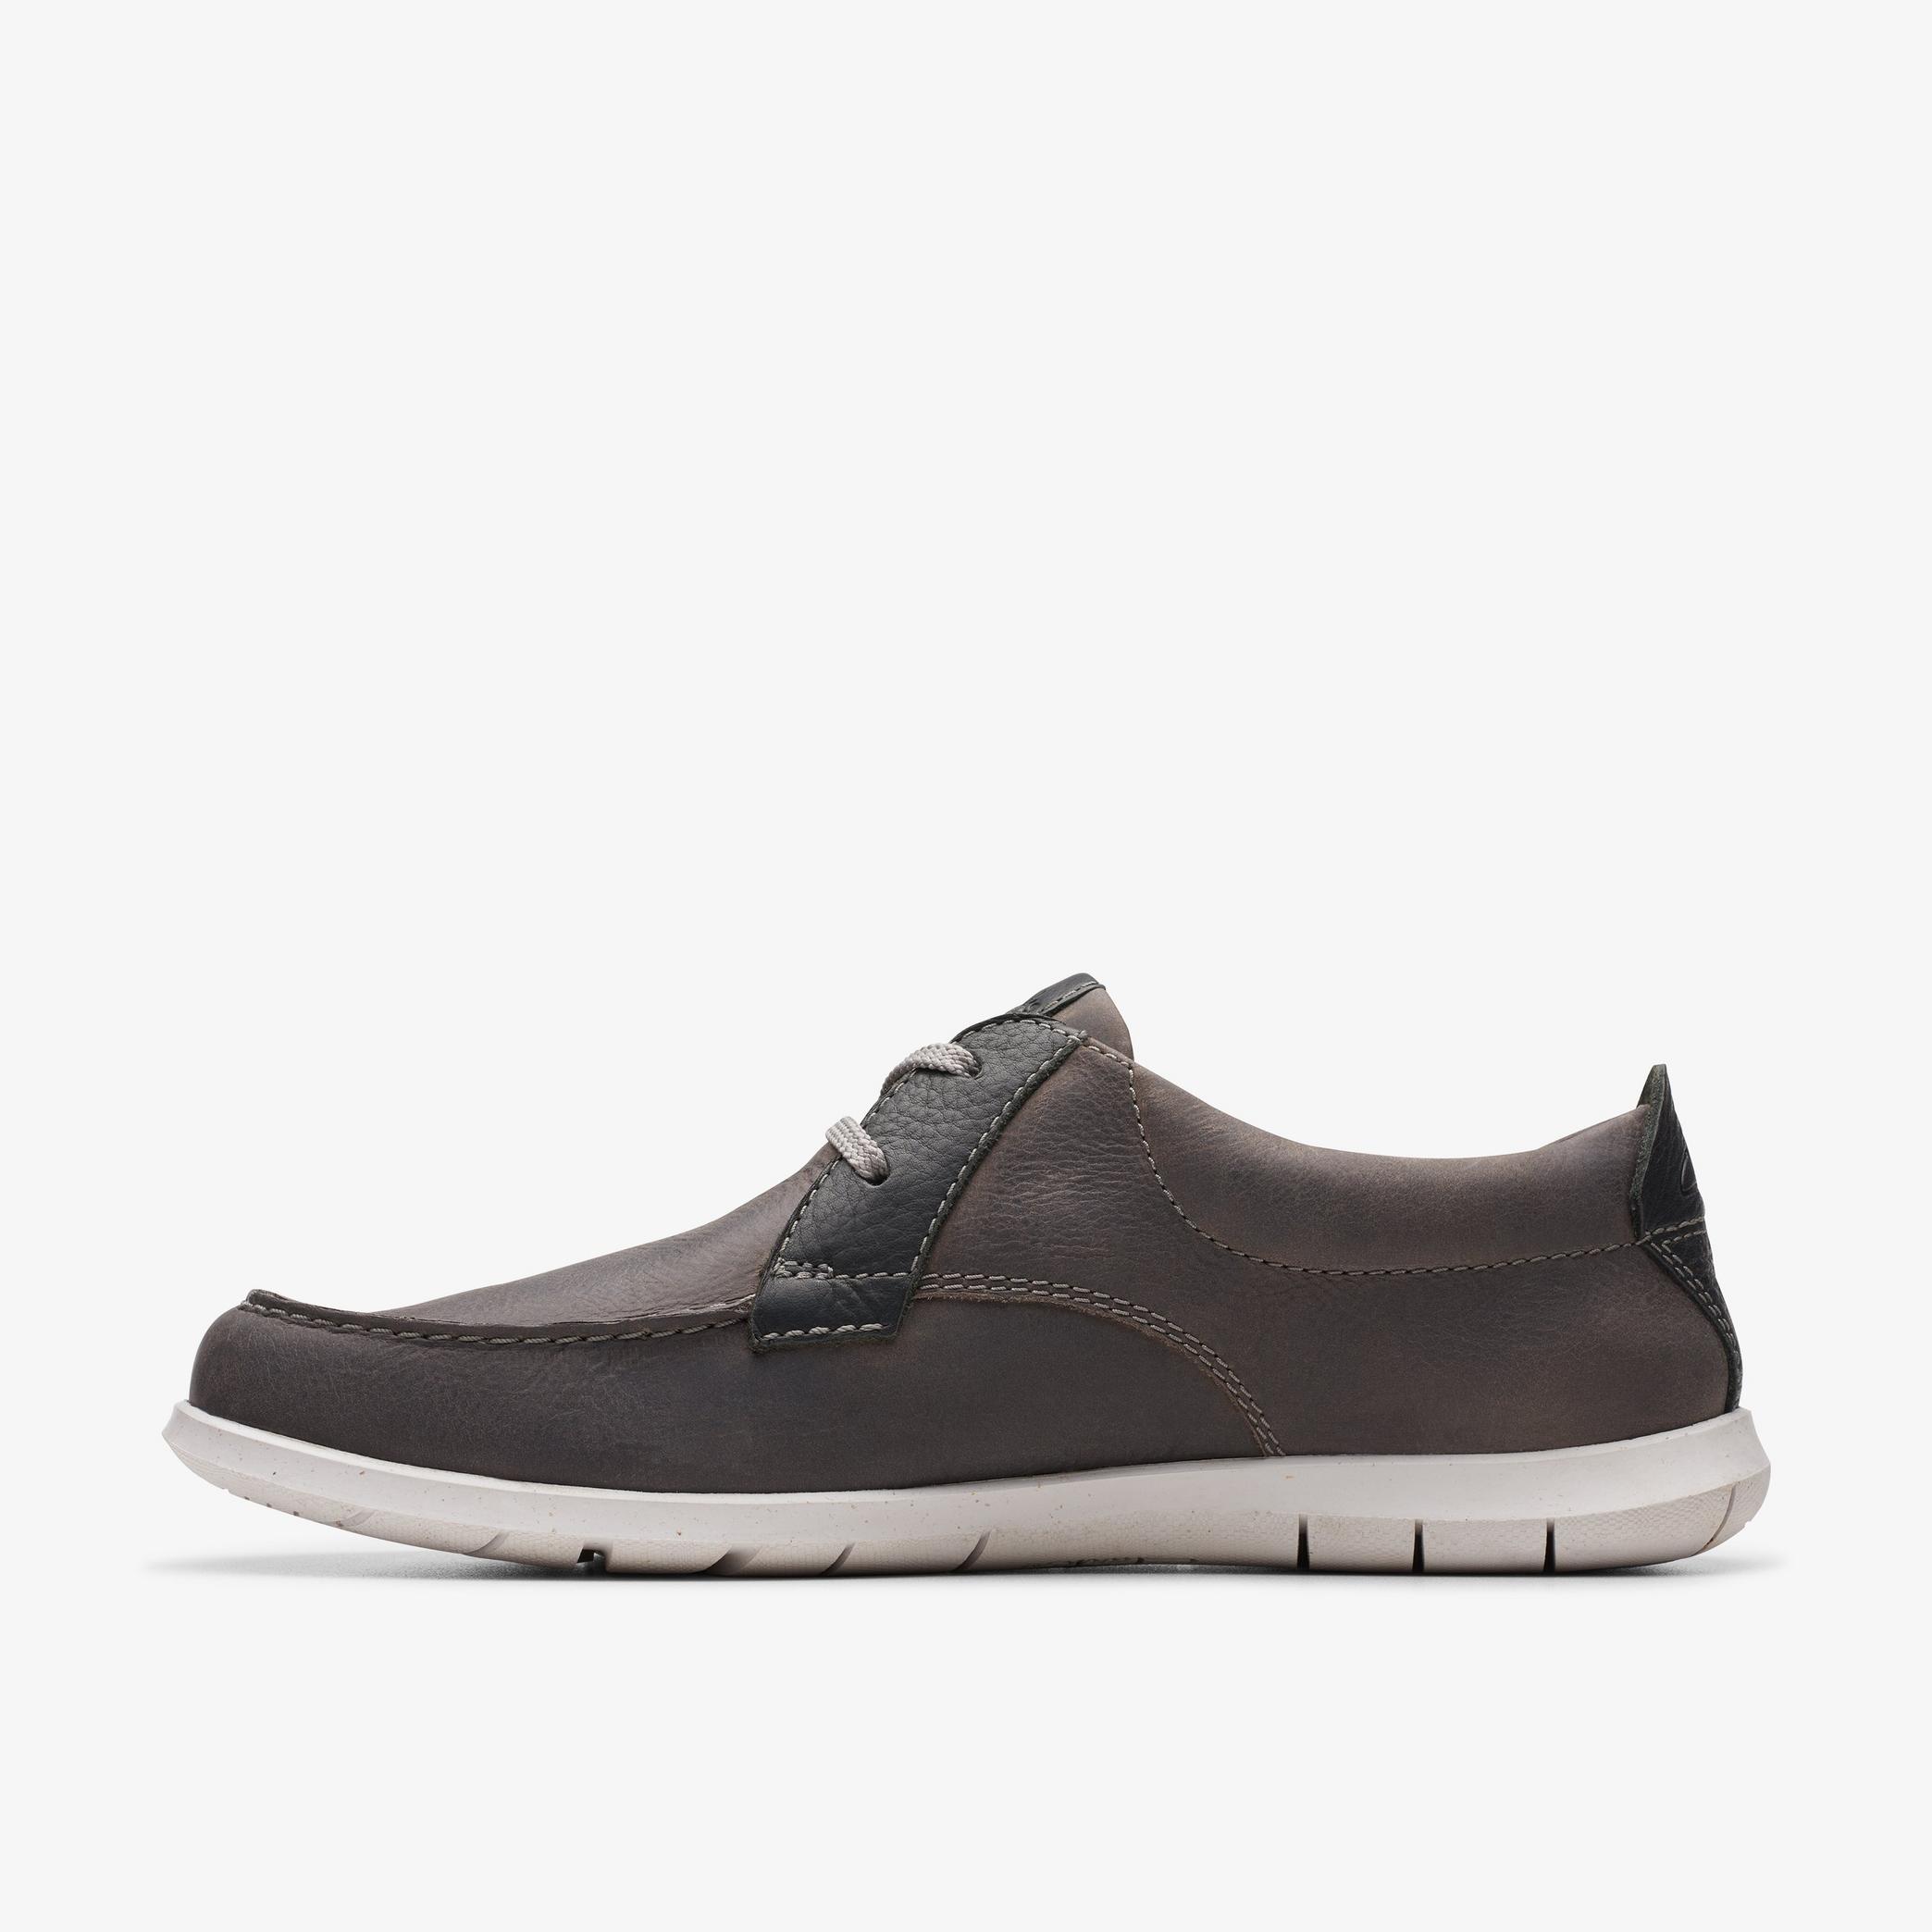 Flexway Lace Light Grey Leather Boat Shoes, view 2 of 6